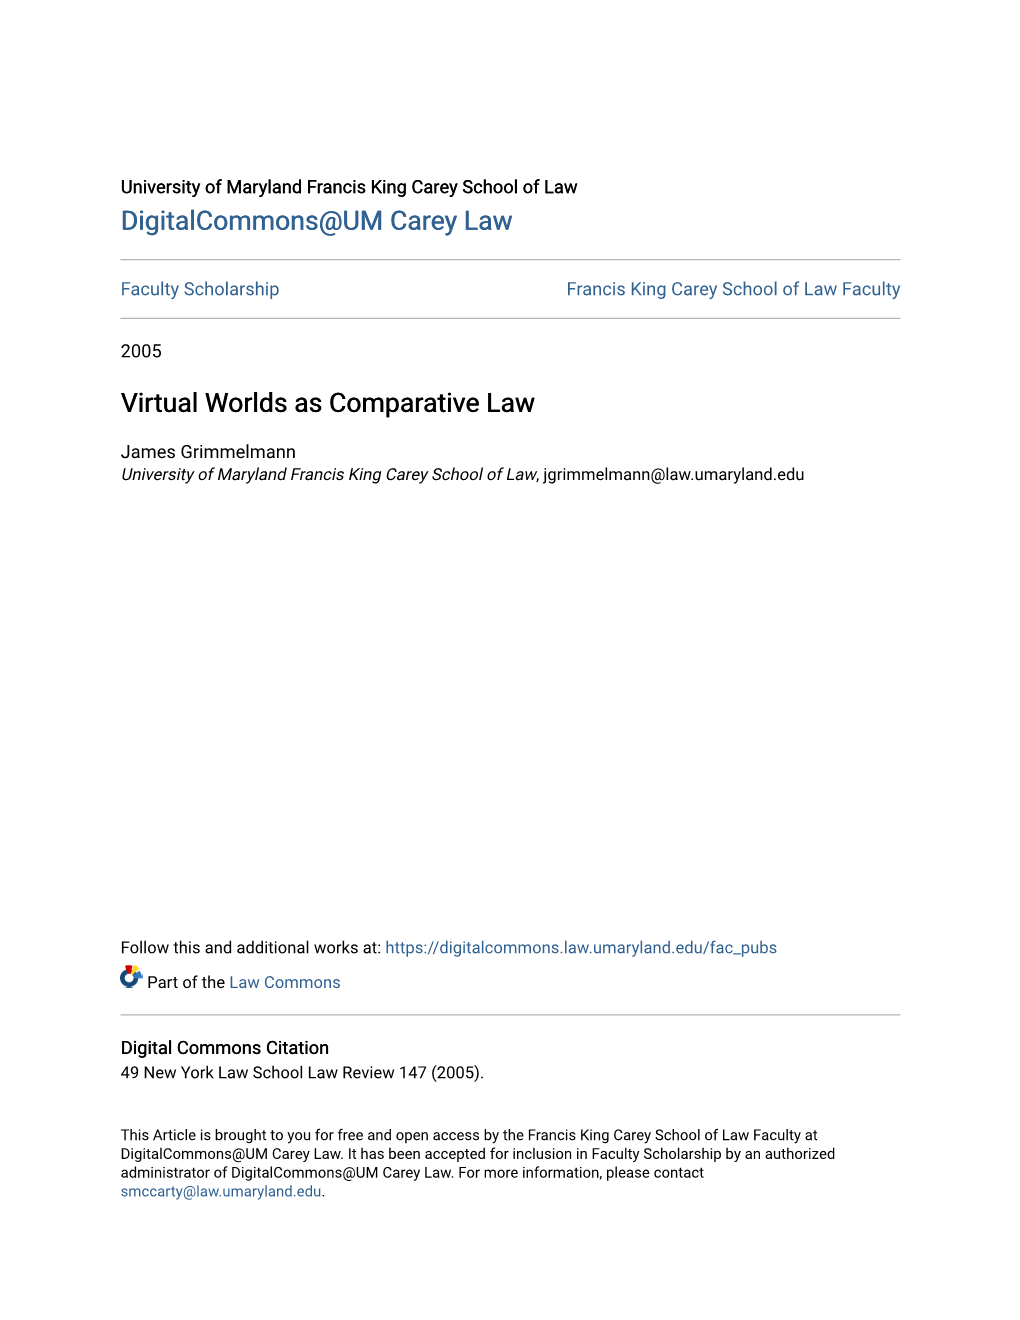 Virtual Worlds As Comparative Law